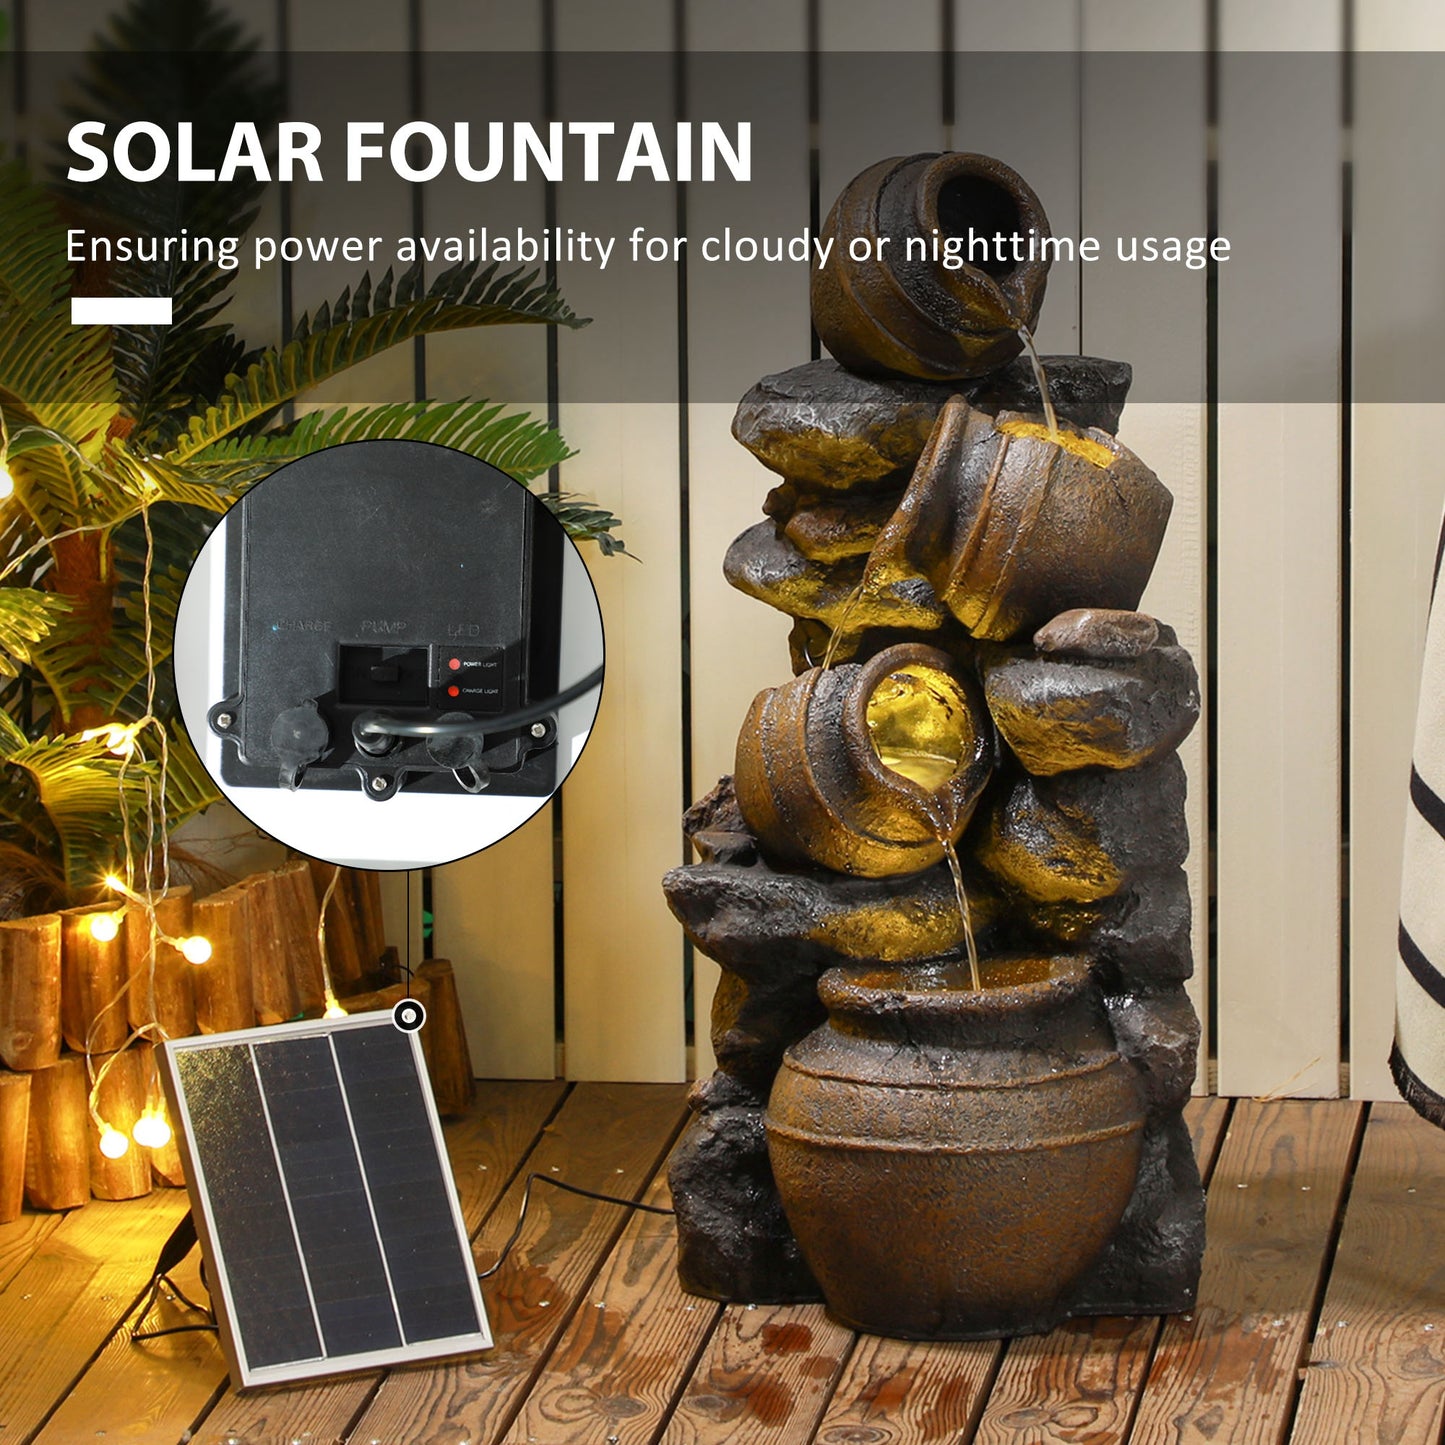 Outsunny Solar Powered Garden Water Feature with LED Lights and Pump, 4 Tier Cascading Water Fountain for Indoor/Outdoor, Jars Waterfall Ornament, 72cm Height